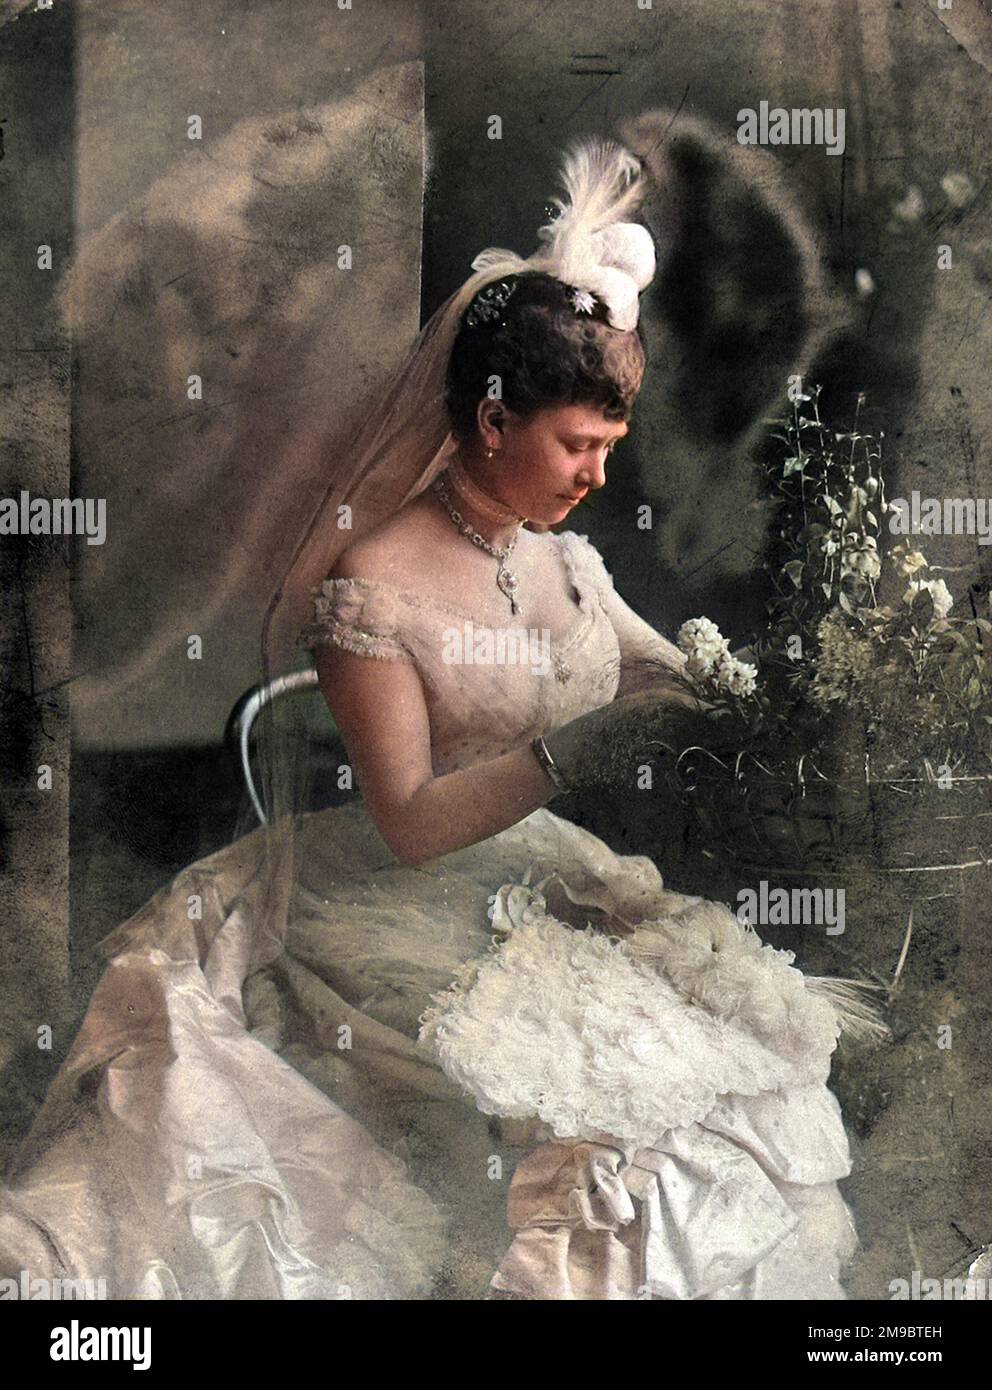 Princess May of Teck (1867 - 1953), later Queen Mary, pictured c.1885, in her 'coming out' year.  In 1891 she married the Duke of York, who became King George V of Great Britain and North Ireland (1865 - 1936). Stock Photo